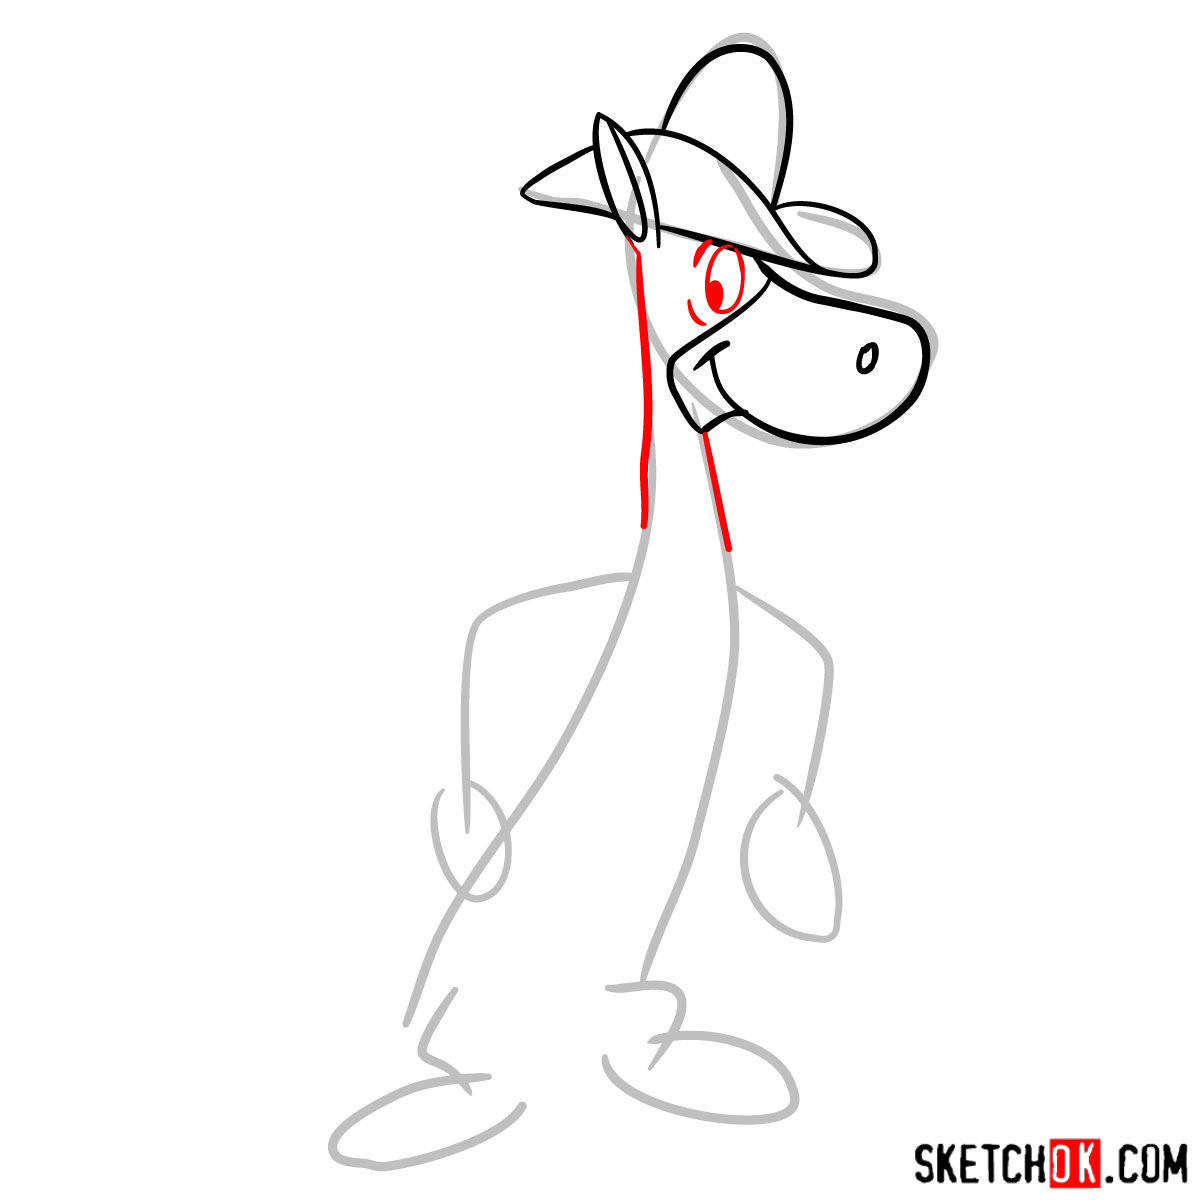 How to draw Quick Draw McGraw - step 04